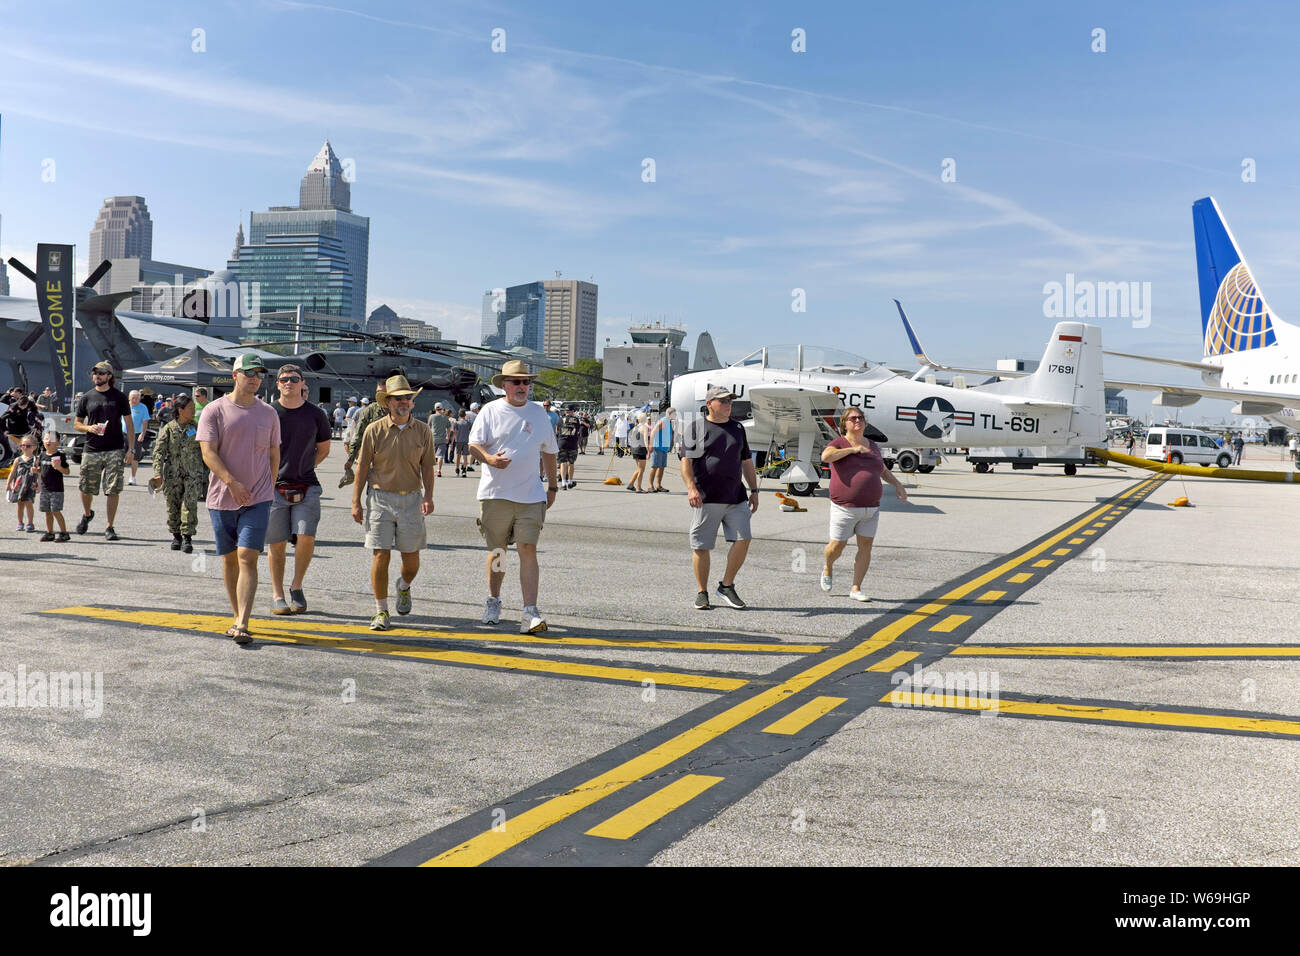 People attend the 2018 Cleveland National Air Show at Burke Lakefront Airport over the Labor Day Weekend in Cleveland, Ohio, USA. Stock Photo